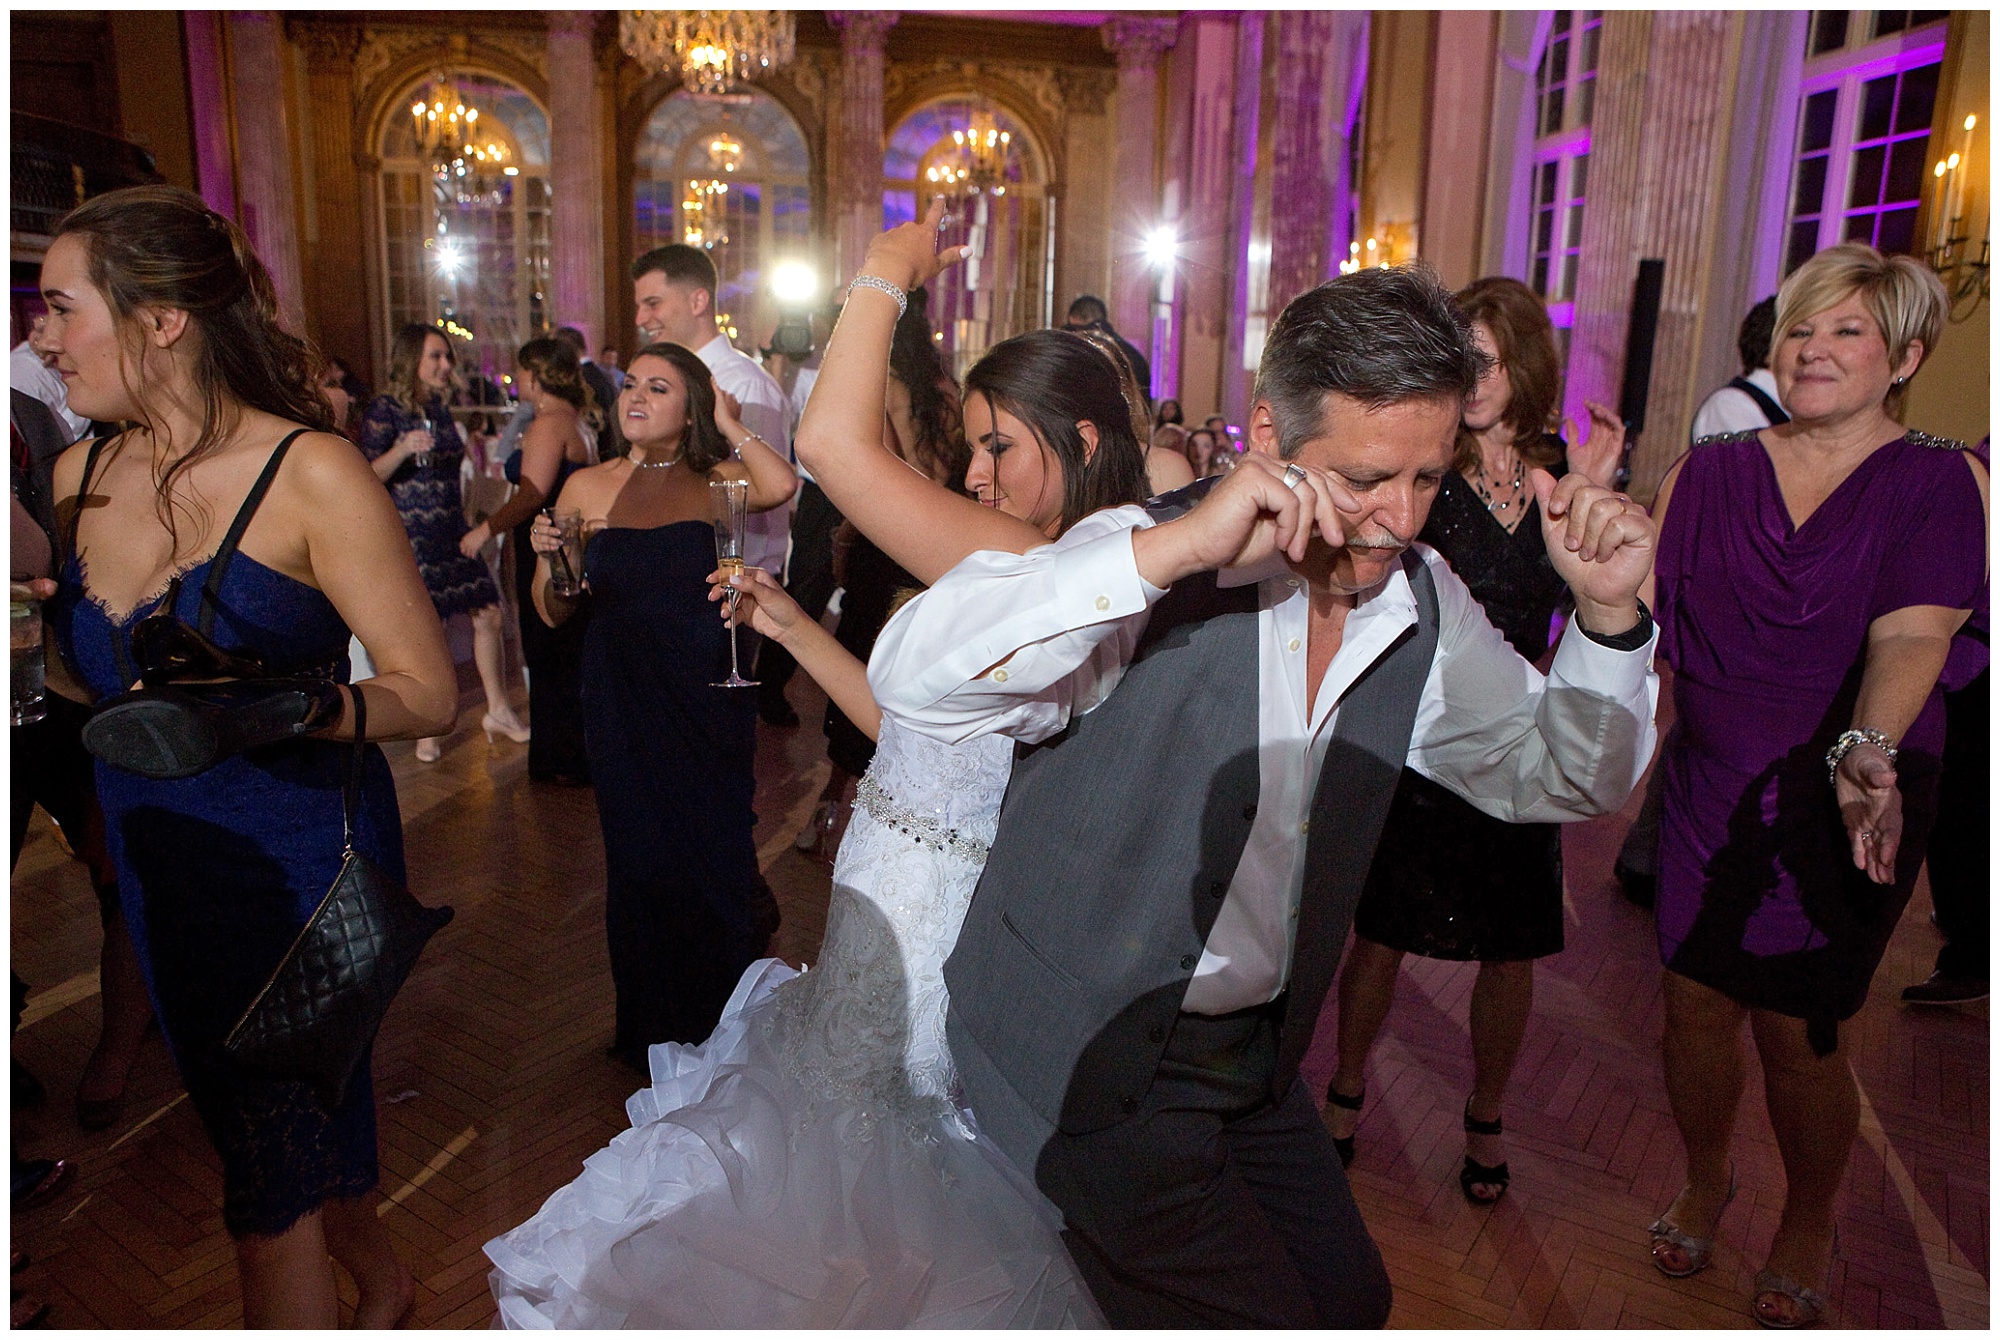 Photos of a bride dancing with her father in law.